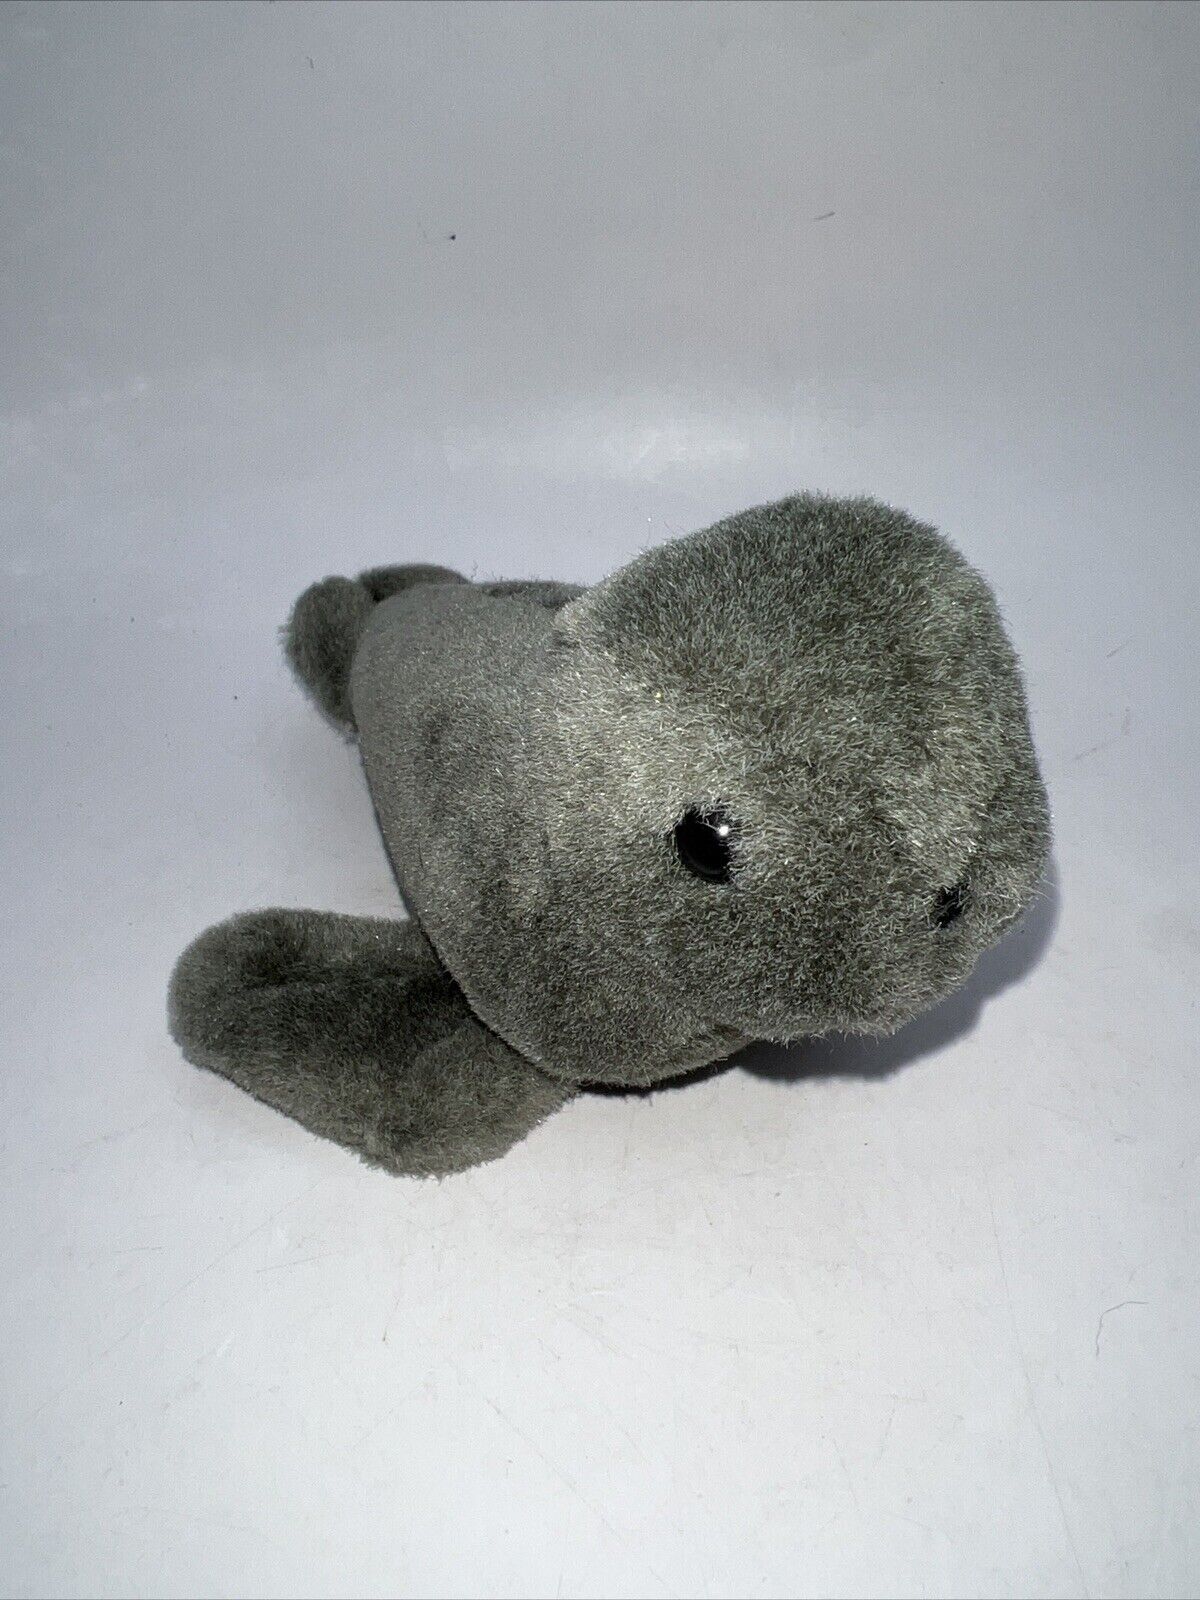 Vintage Small Of The Wild Plush Surf The Seal Pup Toy 